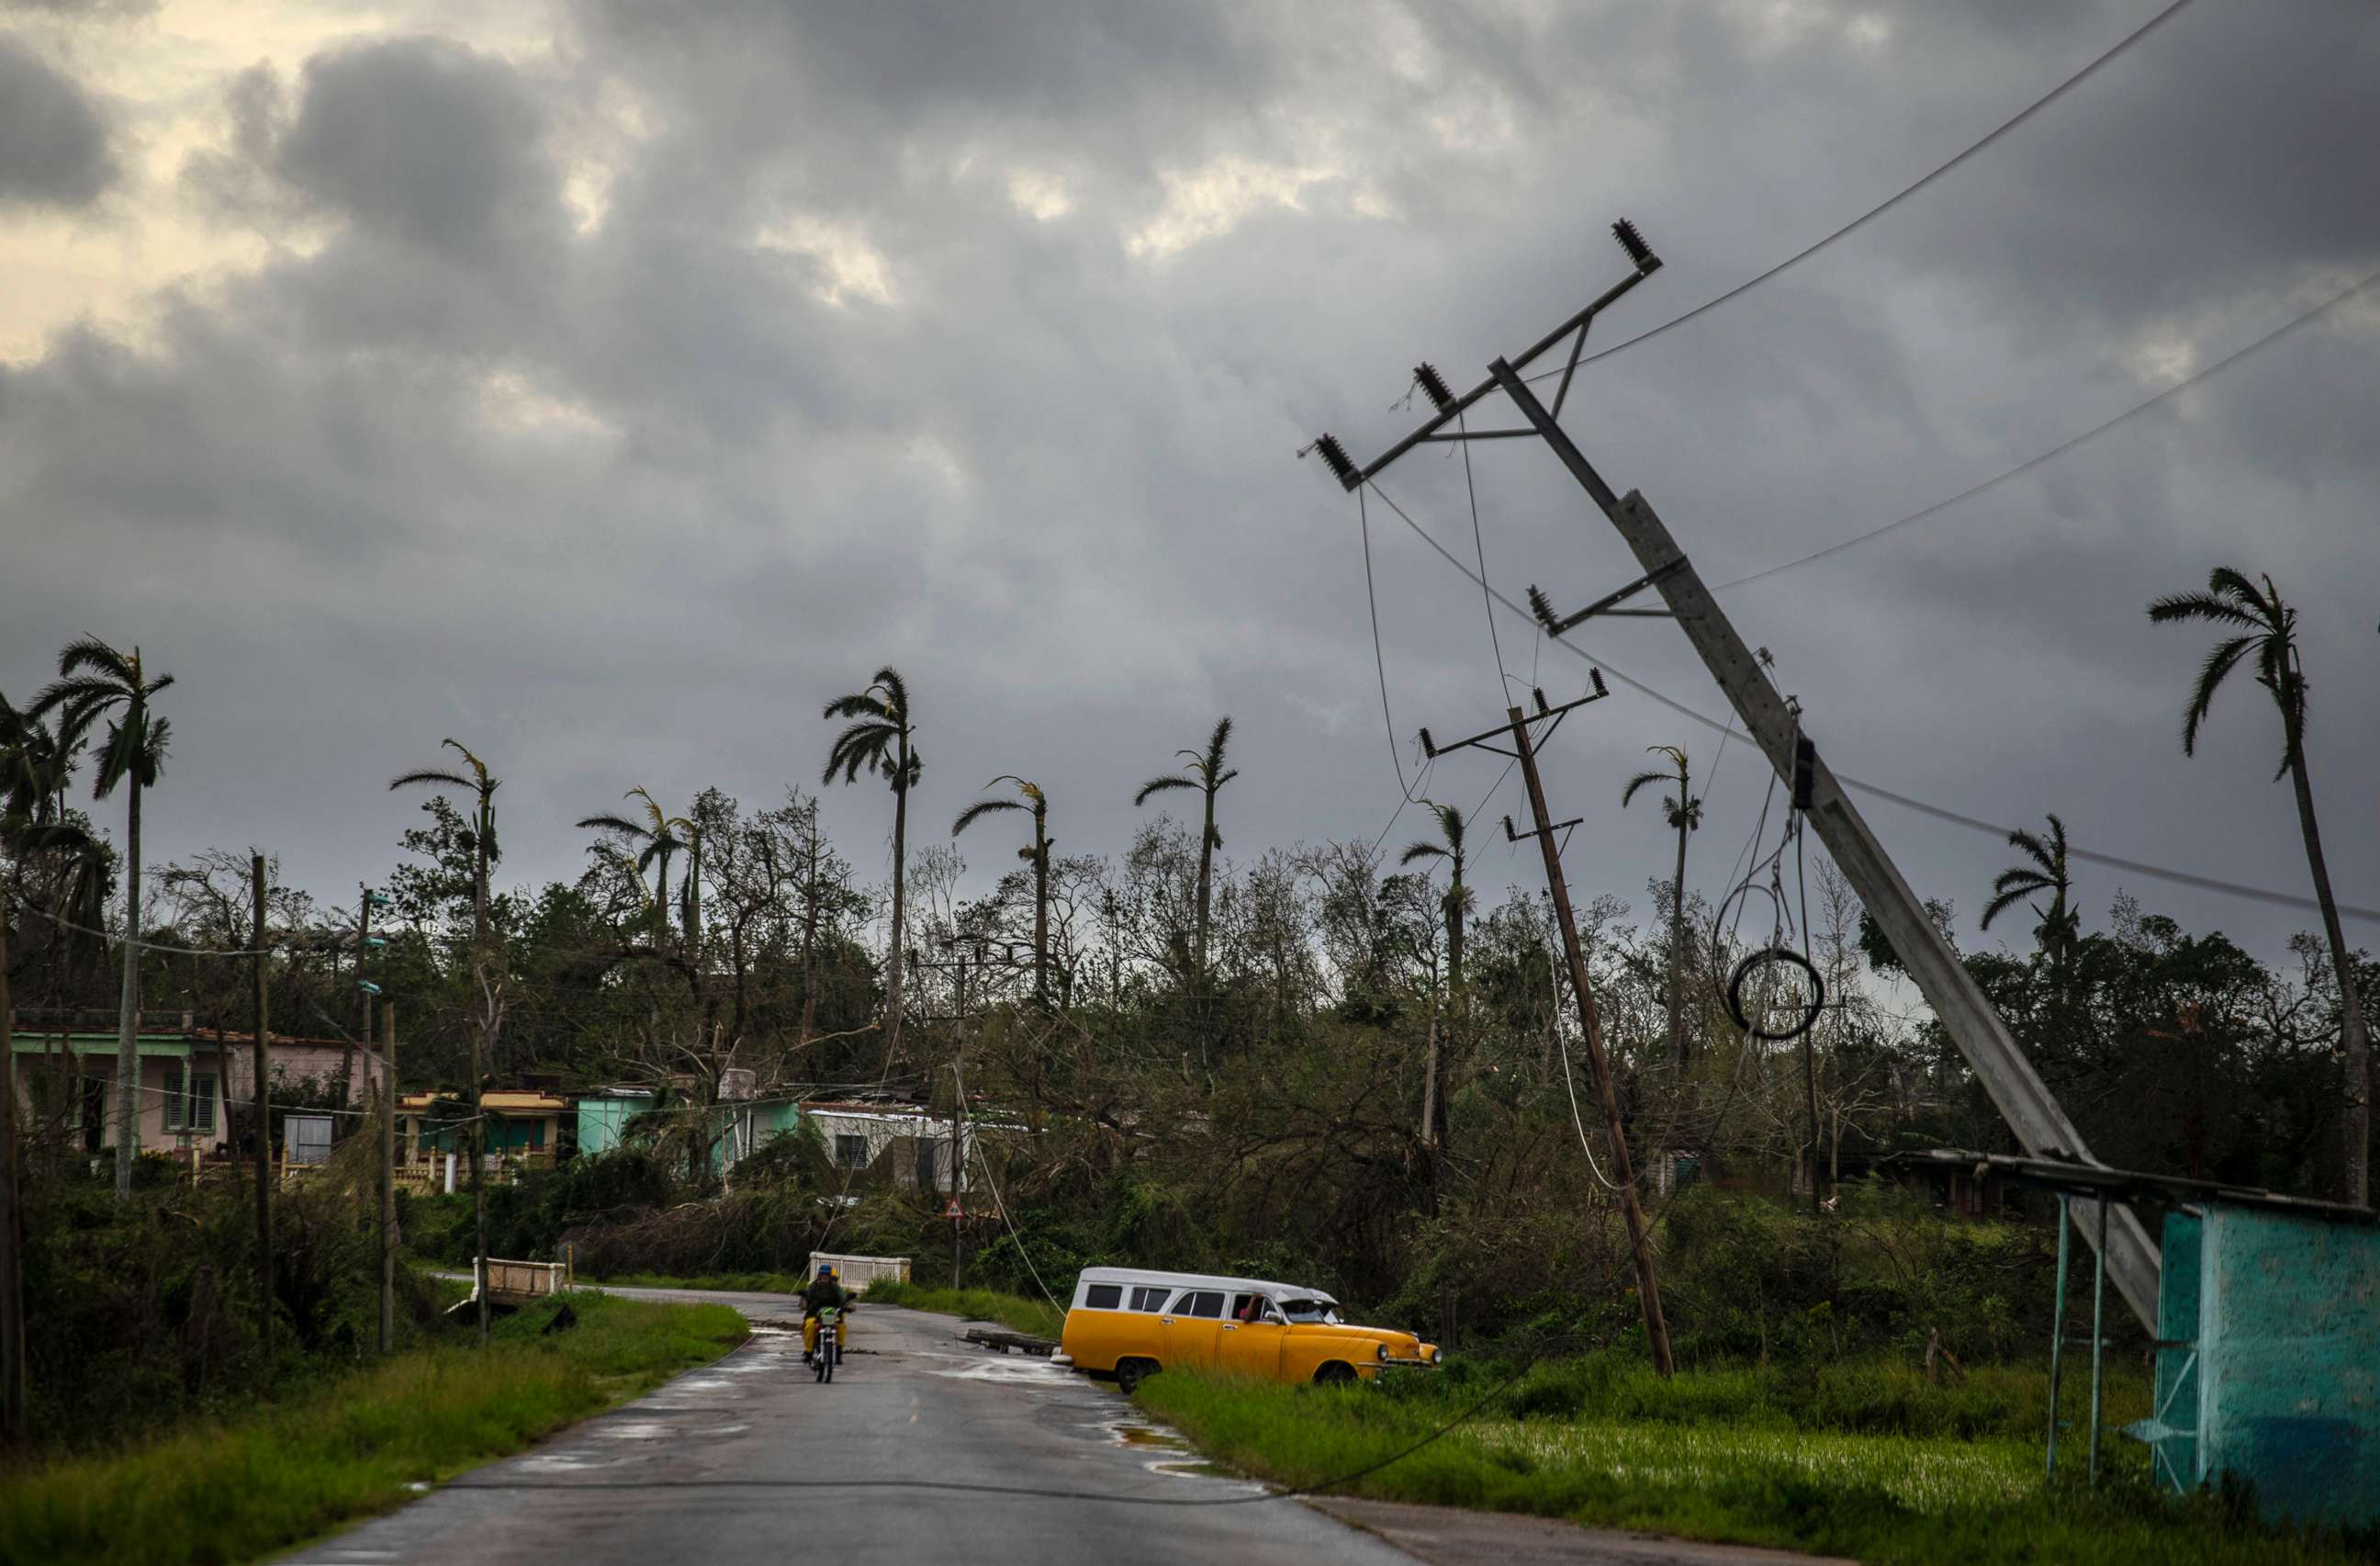 PHOTO: A classic American car drives past utility poles tilted by Hurricane Ian in Pinar del Rio, Cuba, Sept. 27, 2022.